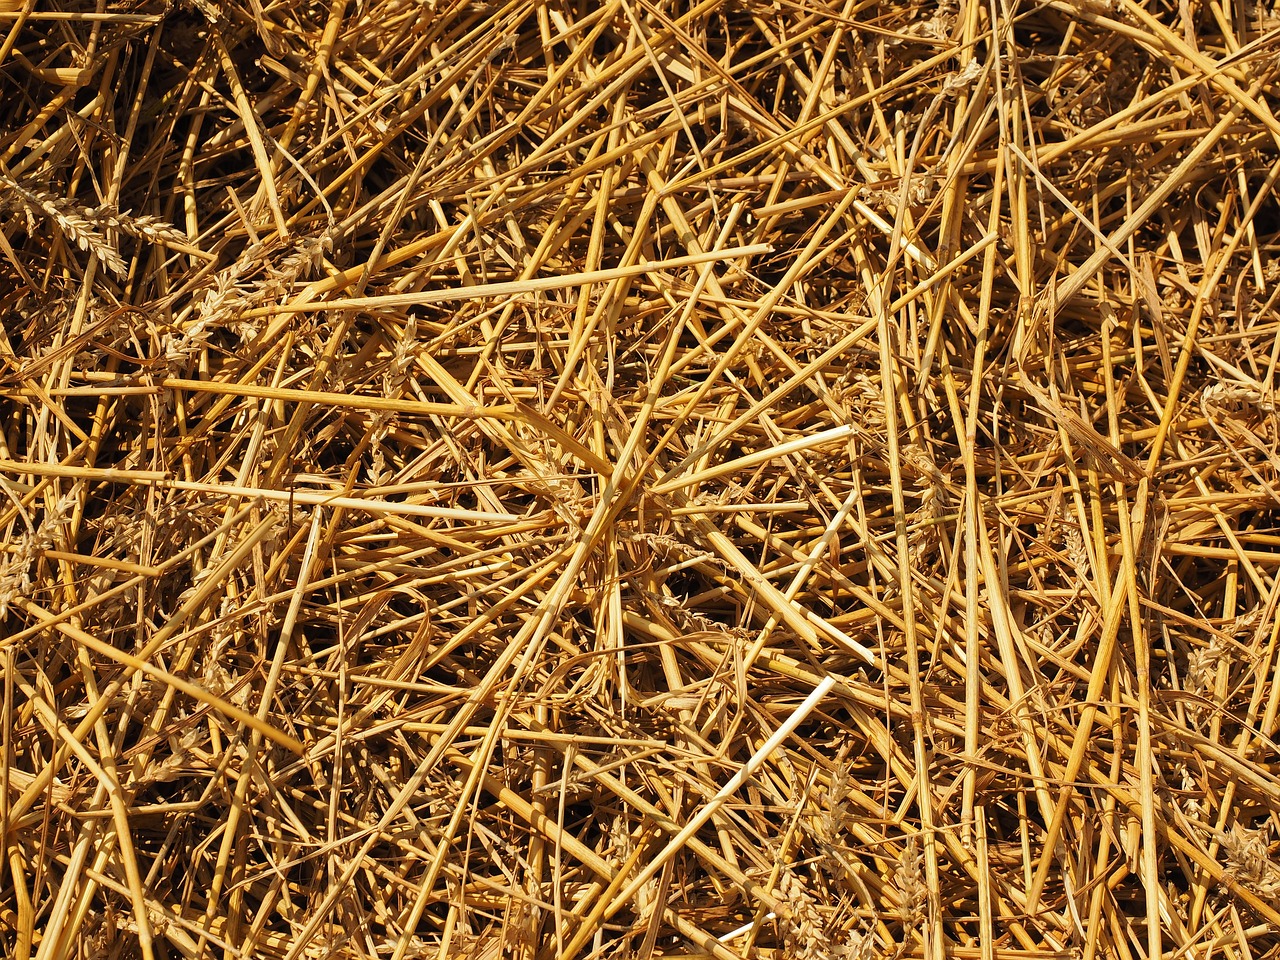 a close up of a pile of straw, inspired by David Ramsay Hay, flickr, symmetrical complex fine detail, corps scattered on the ground, [ closeup ]!!, wyoming